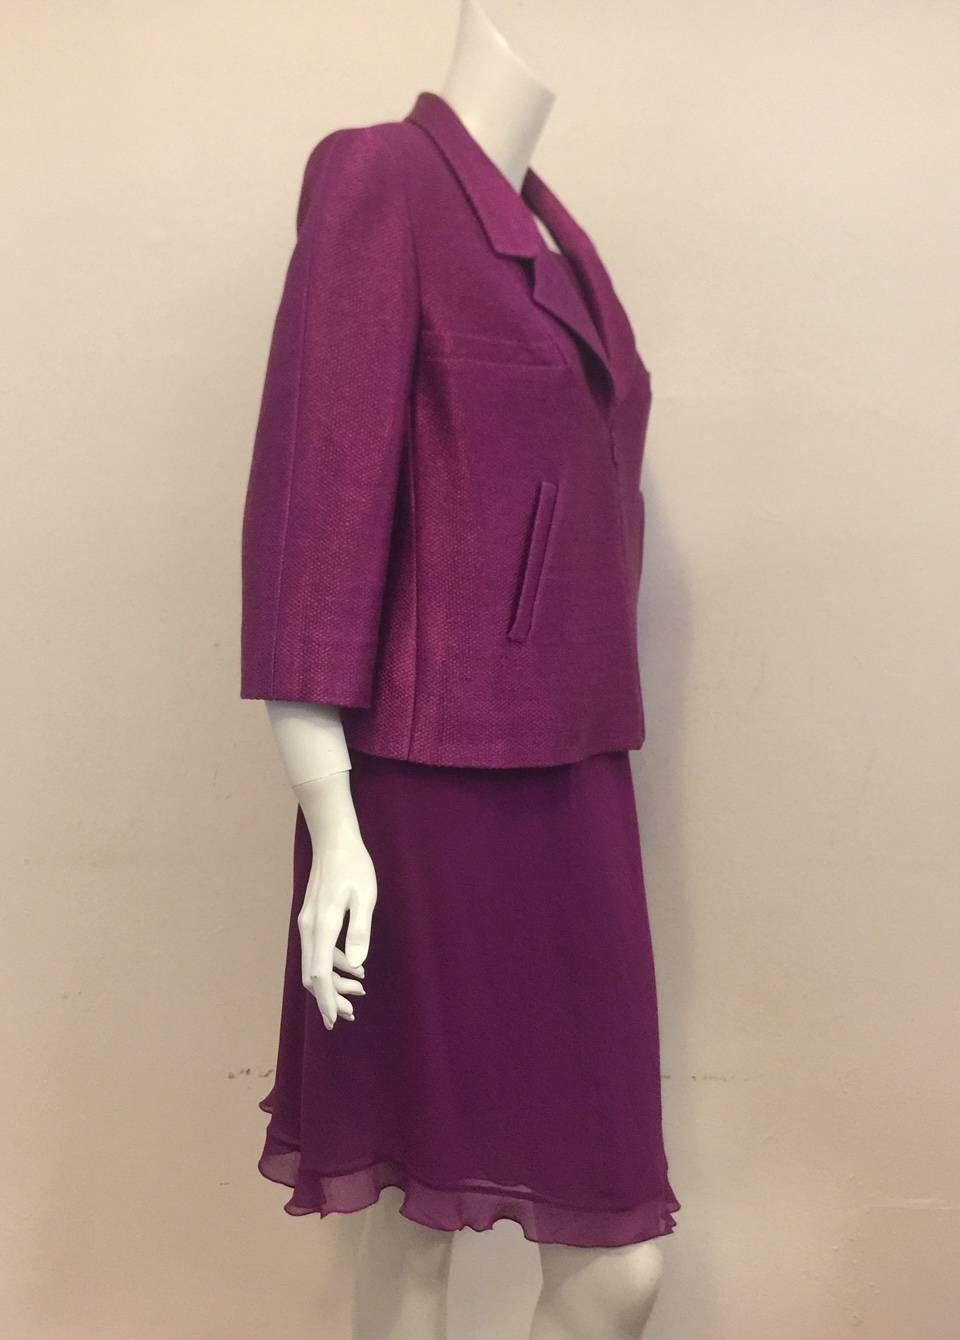 Chanel is so much more than boucle and tweed!  For 2001 Spring Lagerfeld designed this Plum Ensemble that pays homage to classically feminine pieces while updating with a slightly 